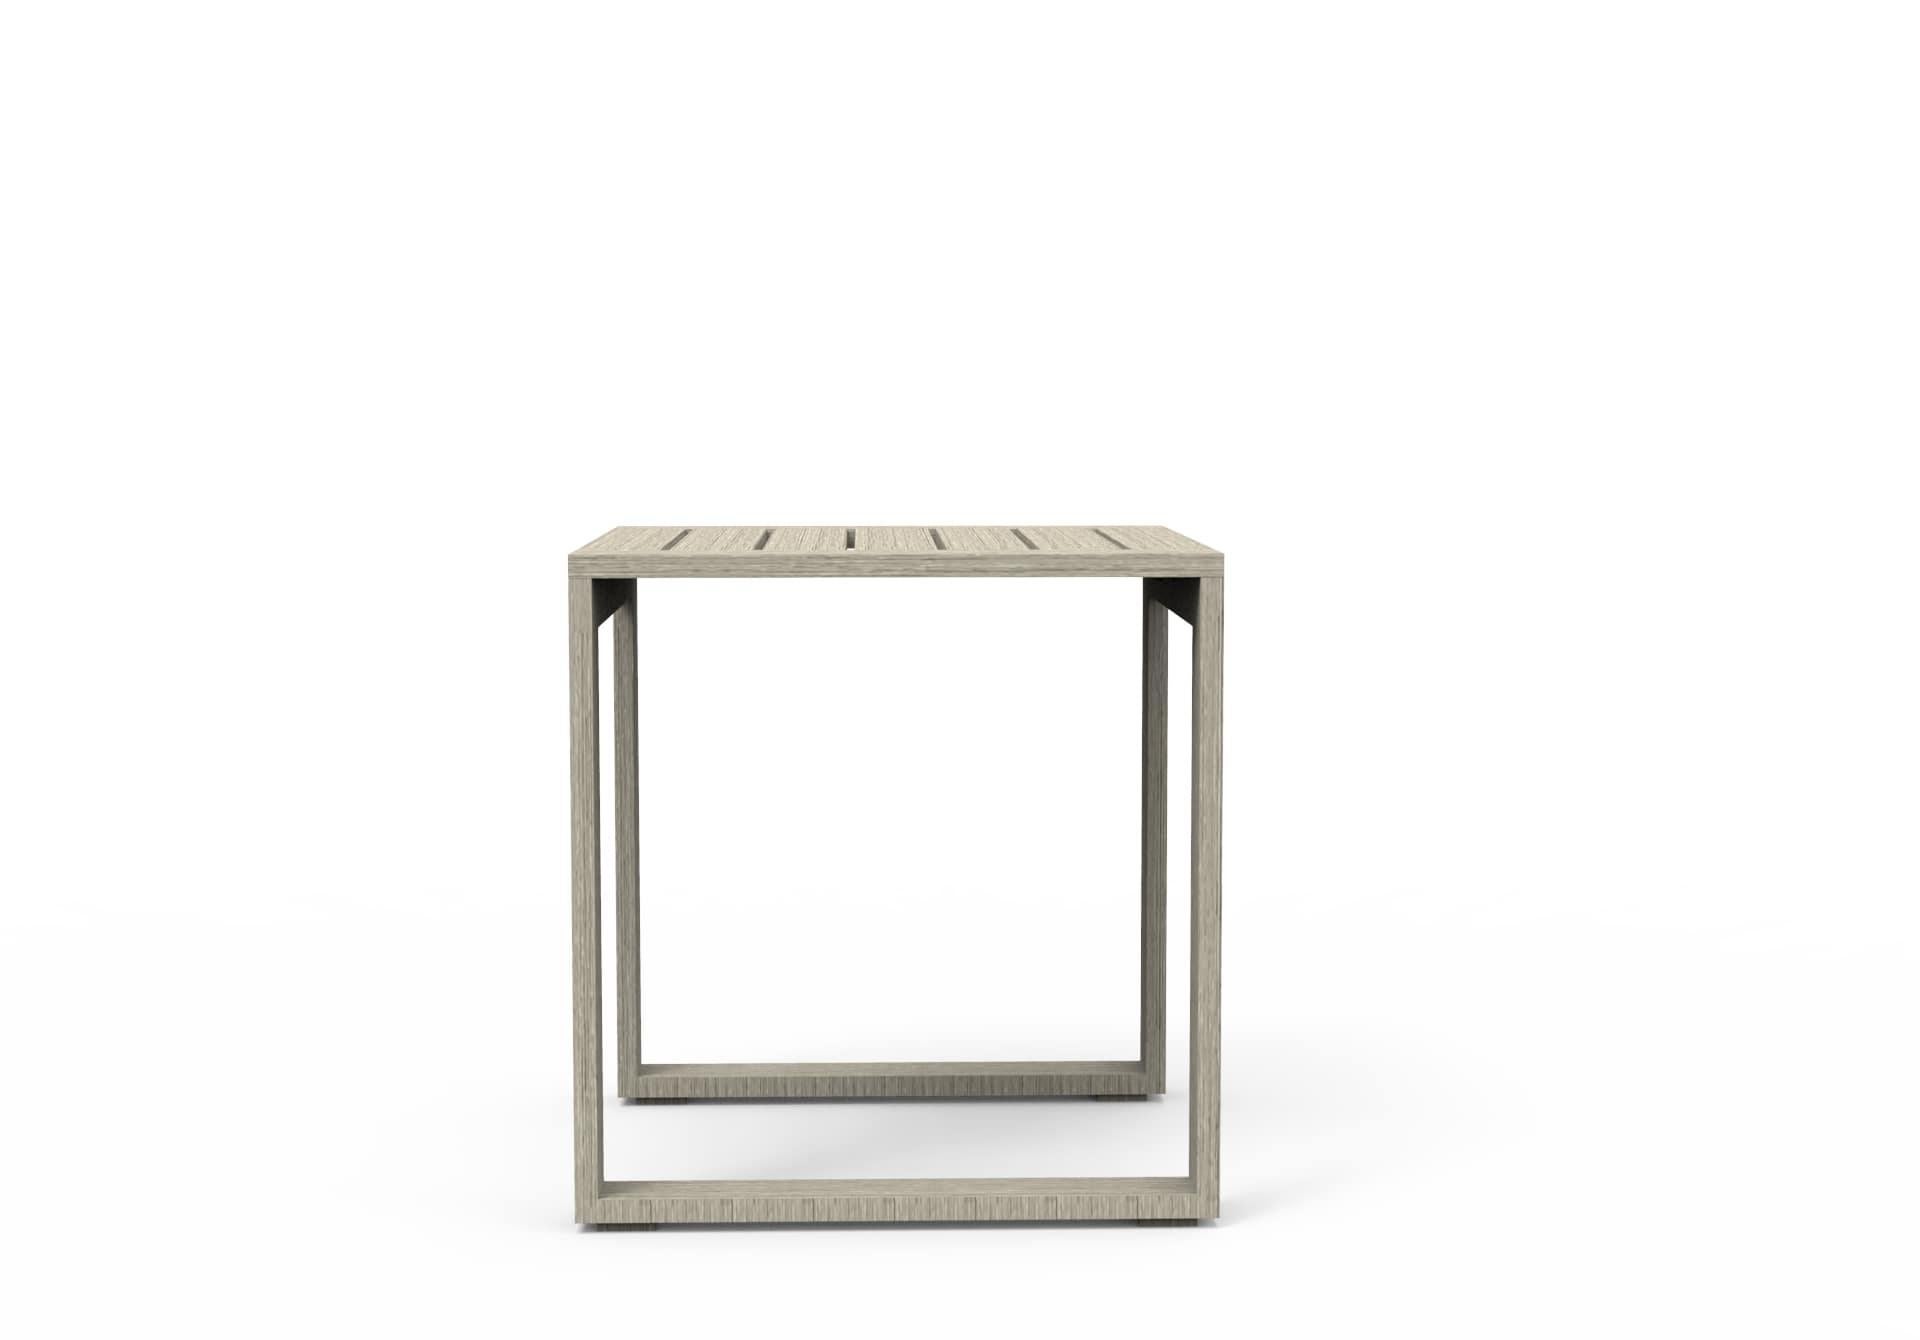 With it’s simple design, the Brixton side table’s wide base and solid construction makes this a remarkable design for years to come. All Cavan furniture is made by hand, upon order, with Grade-A teak wood. Dimensions & finishes are customizable upon